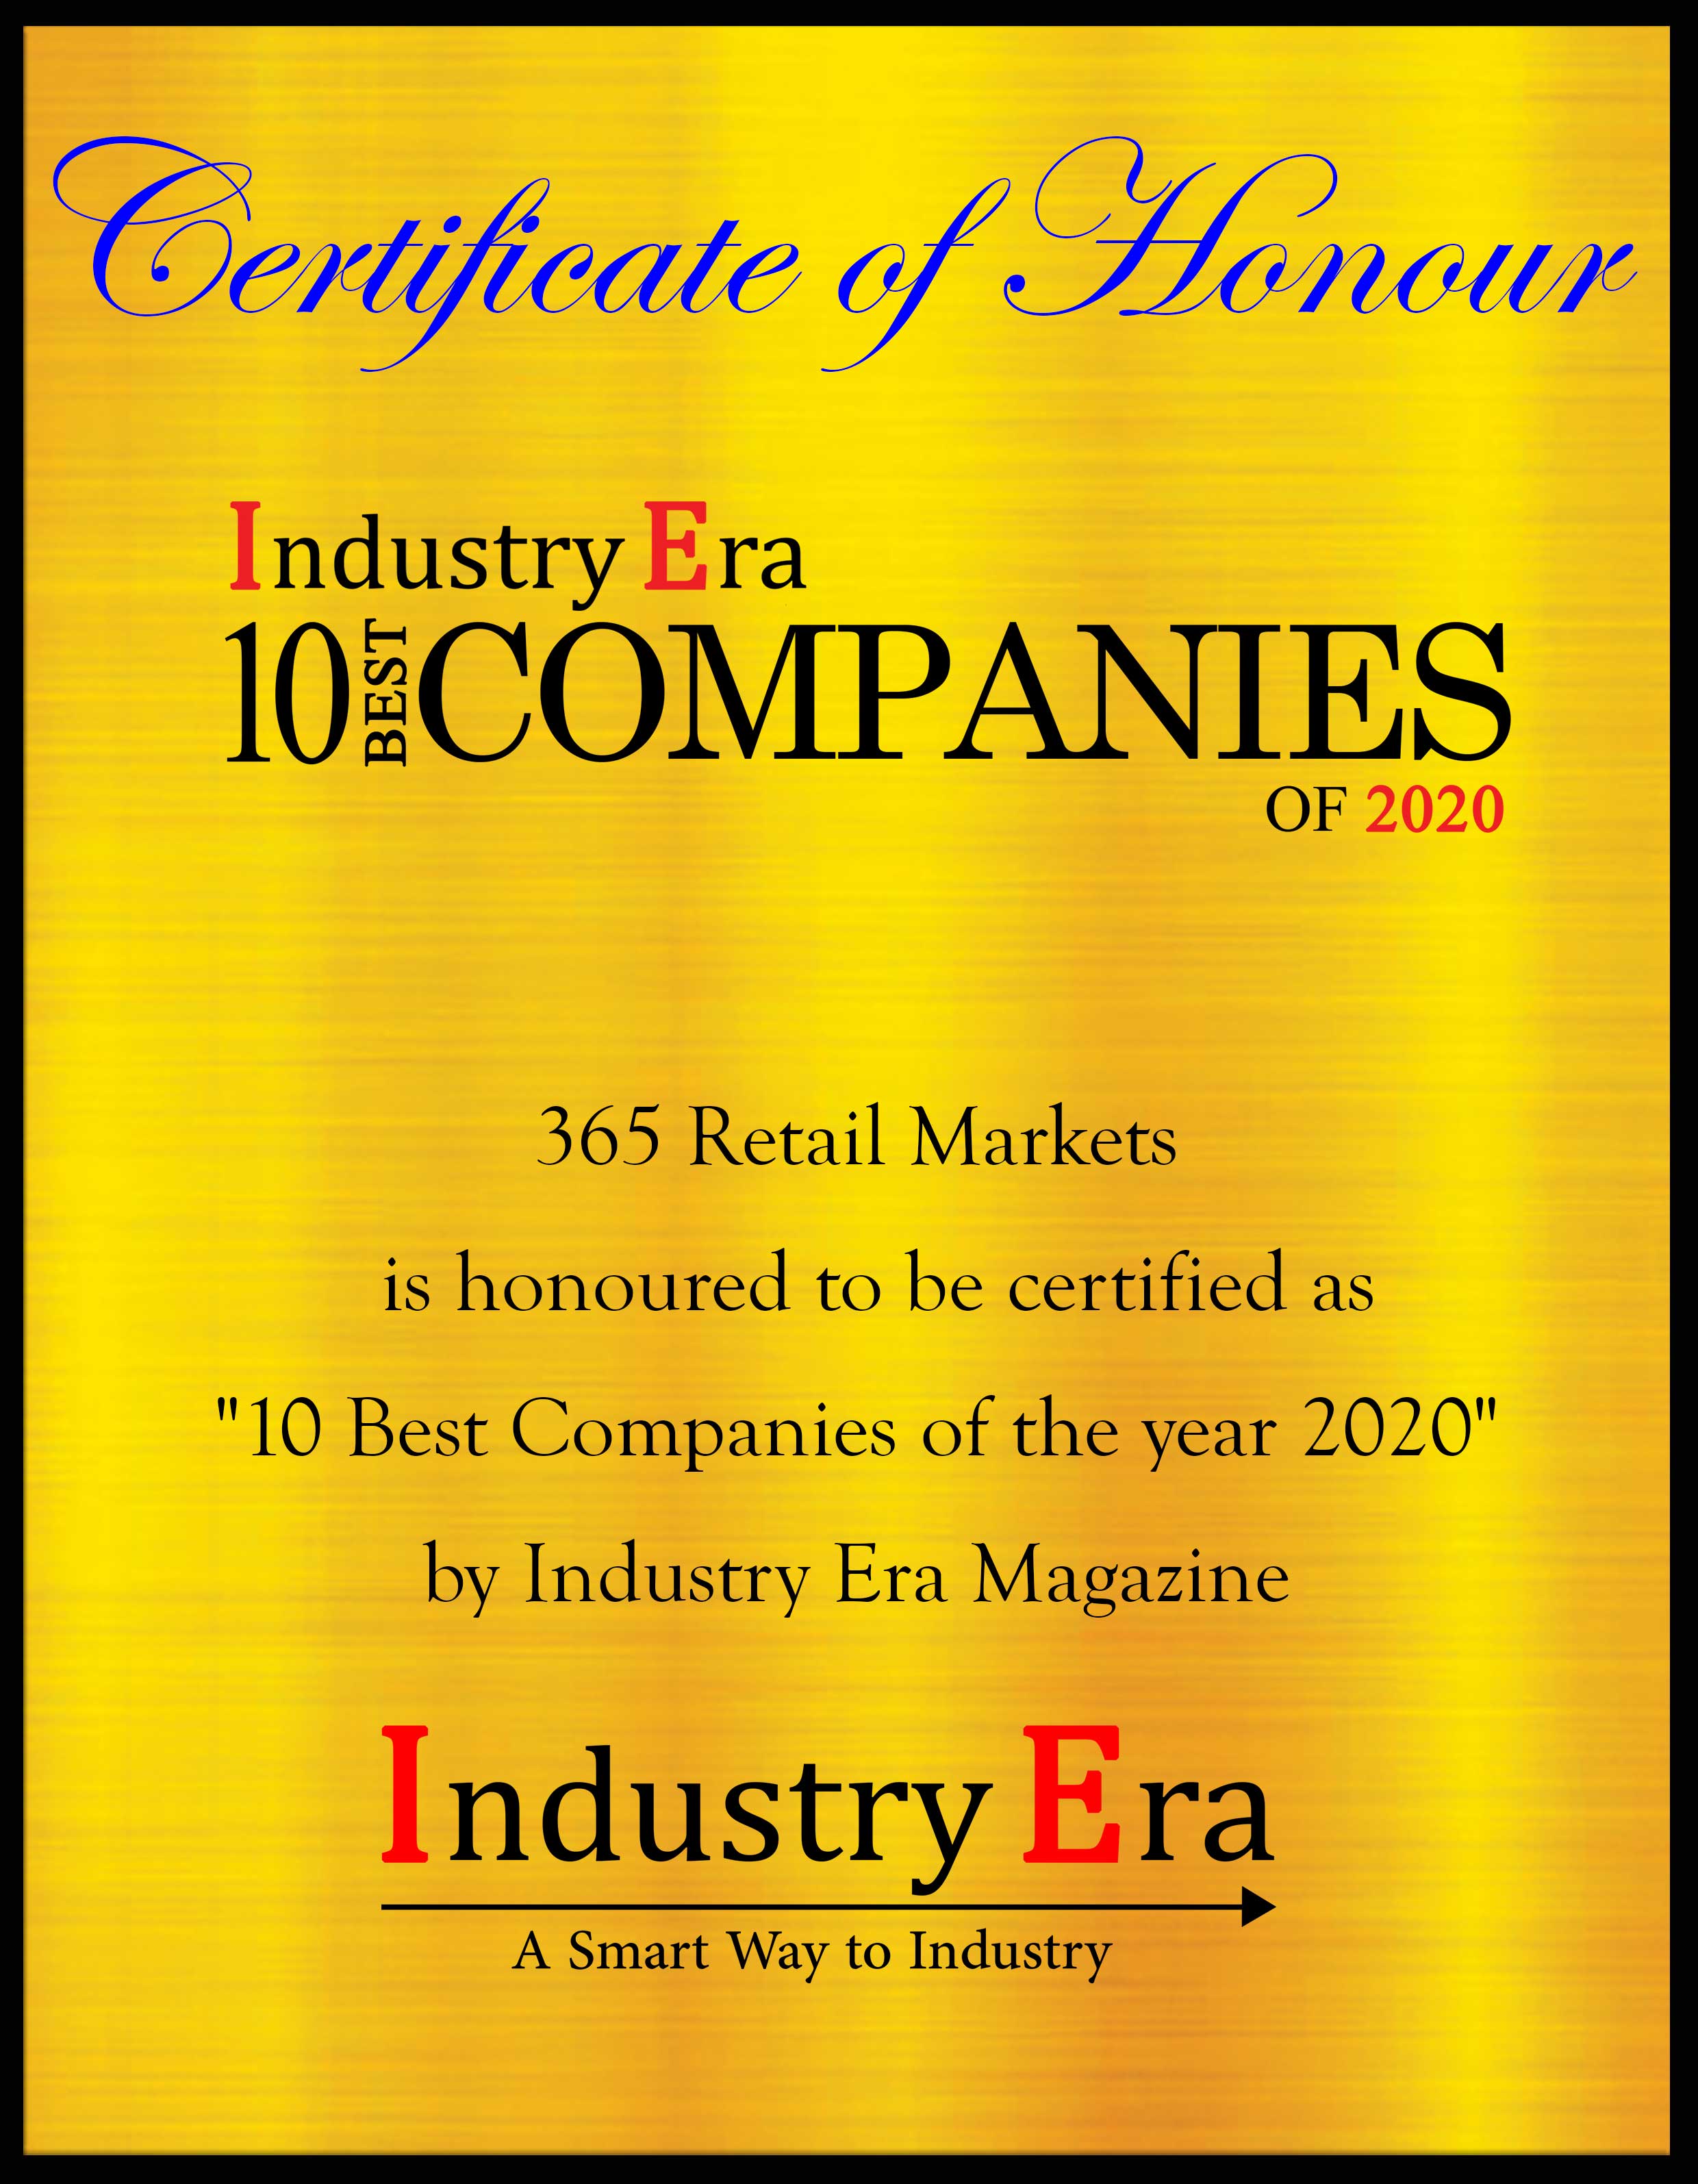 Joe Hessling Founder & CEO 365 Retail Markets 10 Best Companies of Year the 2020